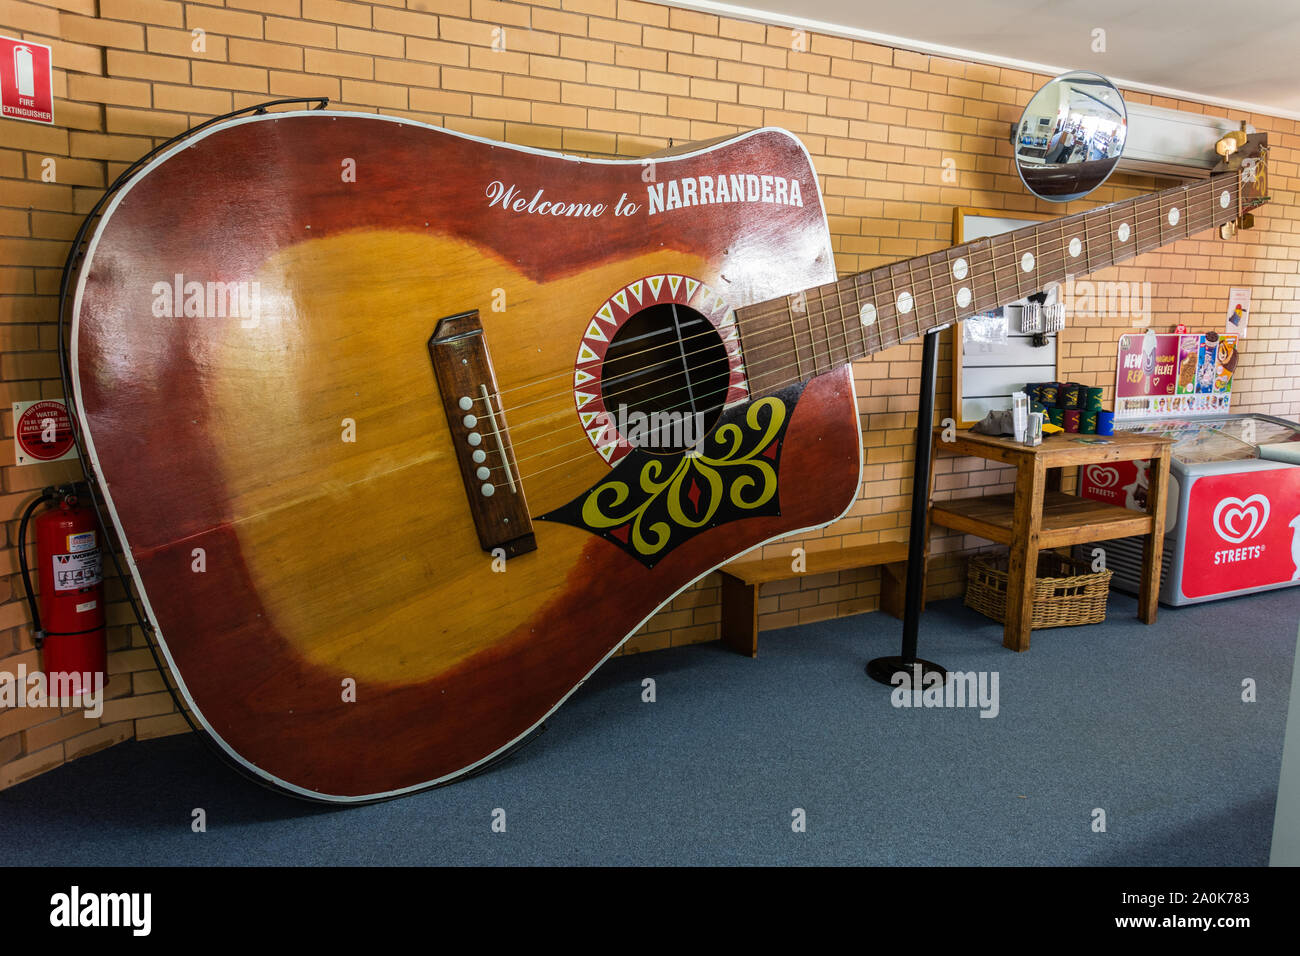 Narrandera, New South Wales, Australia - March 11, 2017. The Big Playable Guitar on display at the Narrandera Visitor Information Centre. The guitar w Stock Photo